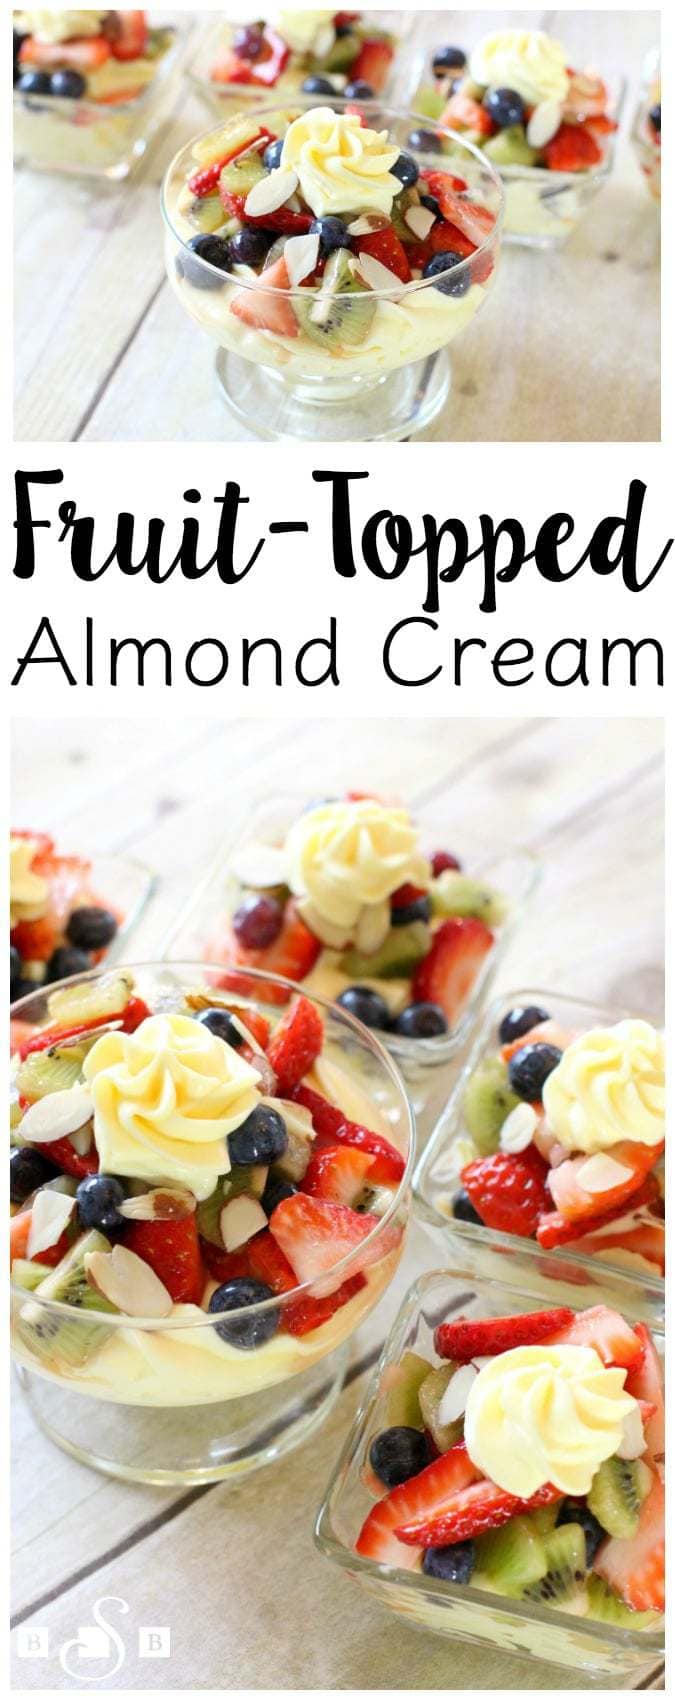 Fruit Topped Almond Cream is a light, fluffy and incredibly creamy dip that is so delicious. This vanilla almond mousse recipe is easy to make, it comes together quickly and has only 4 ingredients!